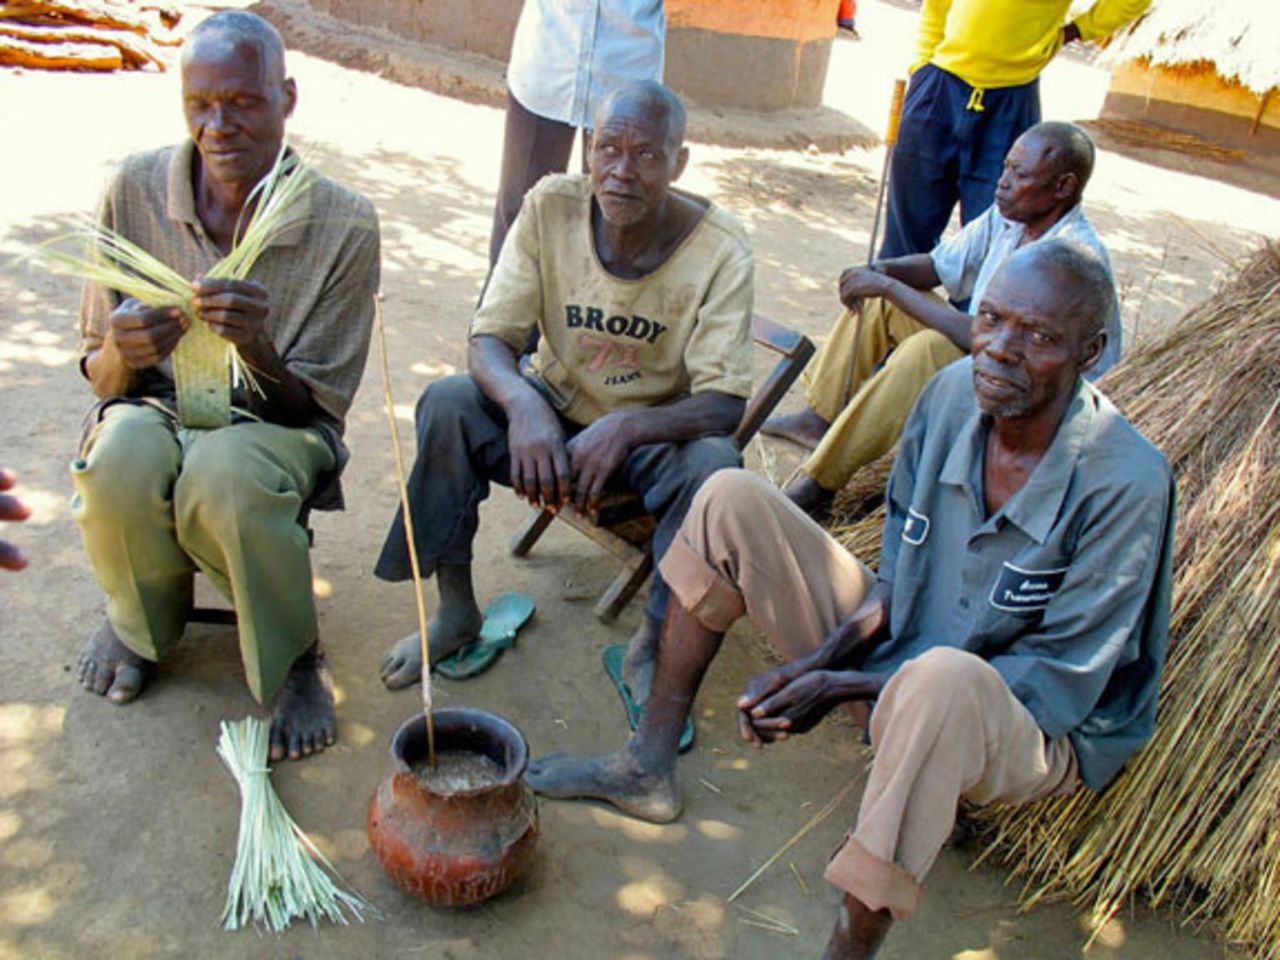 Statistically Africa's biggest drinkers, Ugandans enjoy a pot of ajono, a semi-fermented beer. "Getting a round in" here just involves passing the straw. 